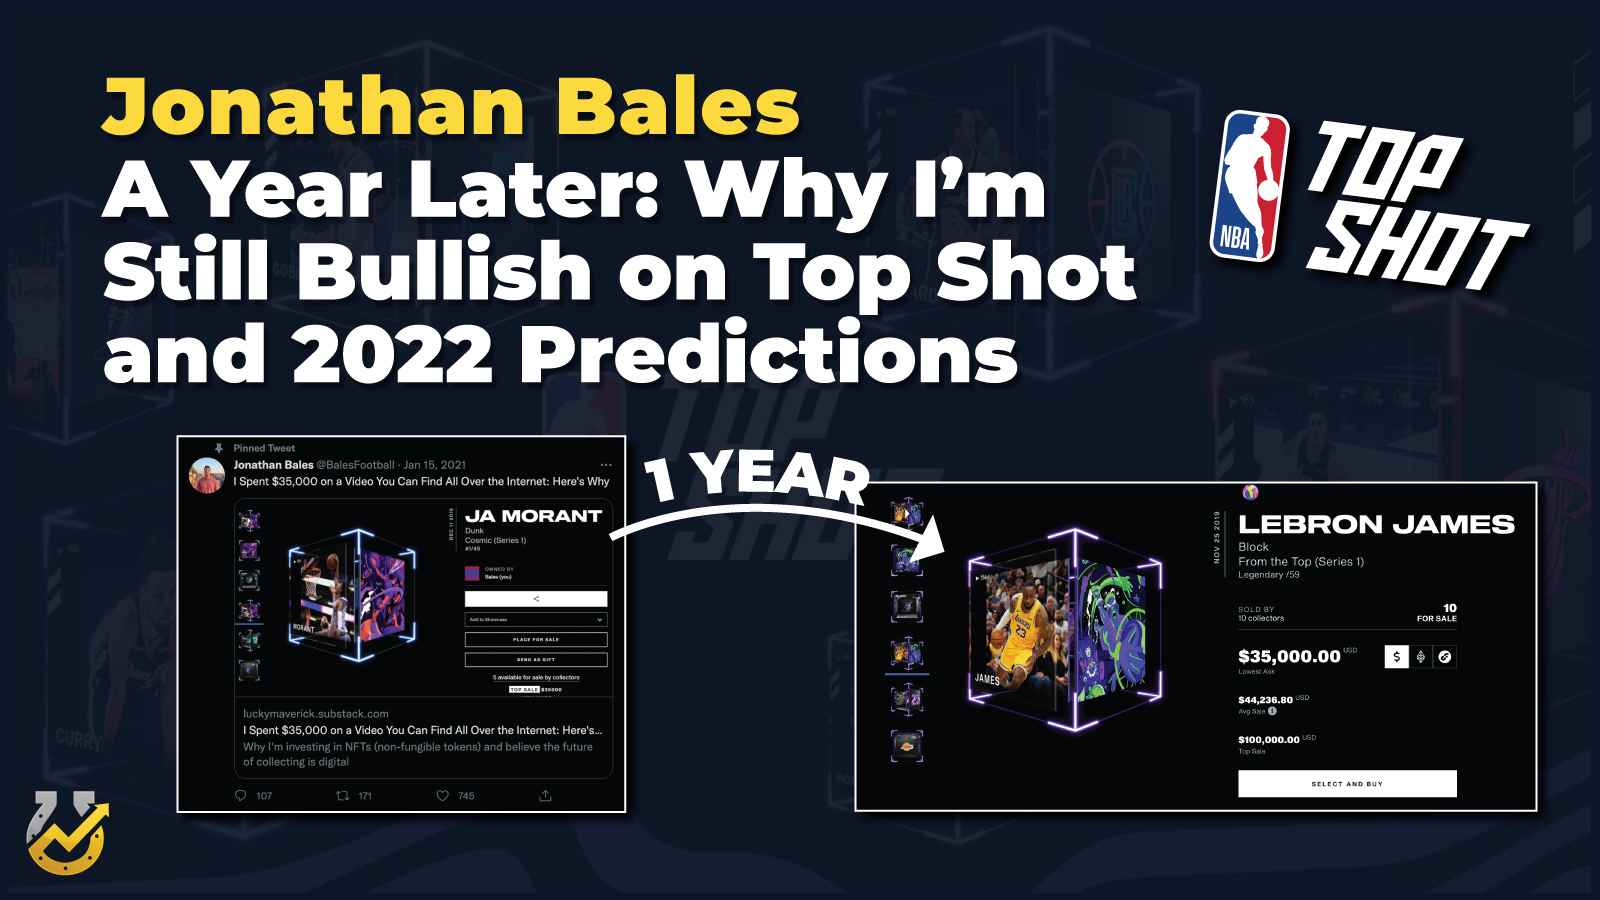 A Year Later: Why I’m Still Bullish on NBA Top Shot (Plus My 2022 Predictions)